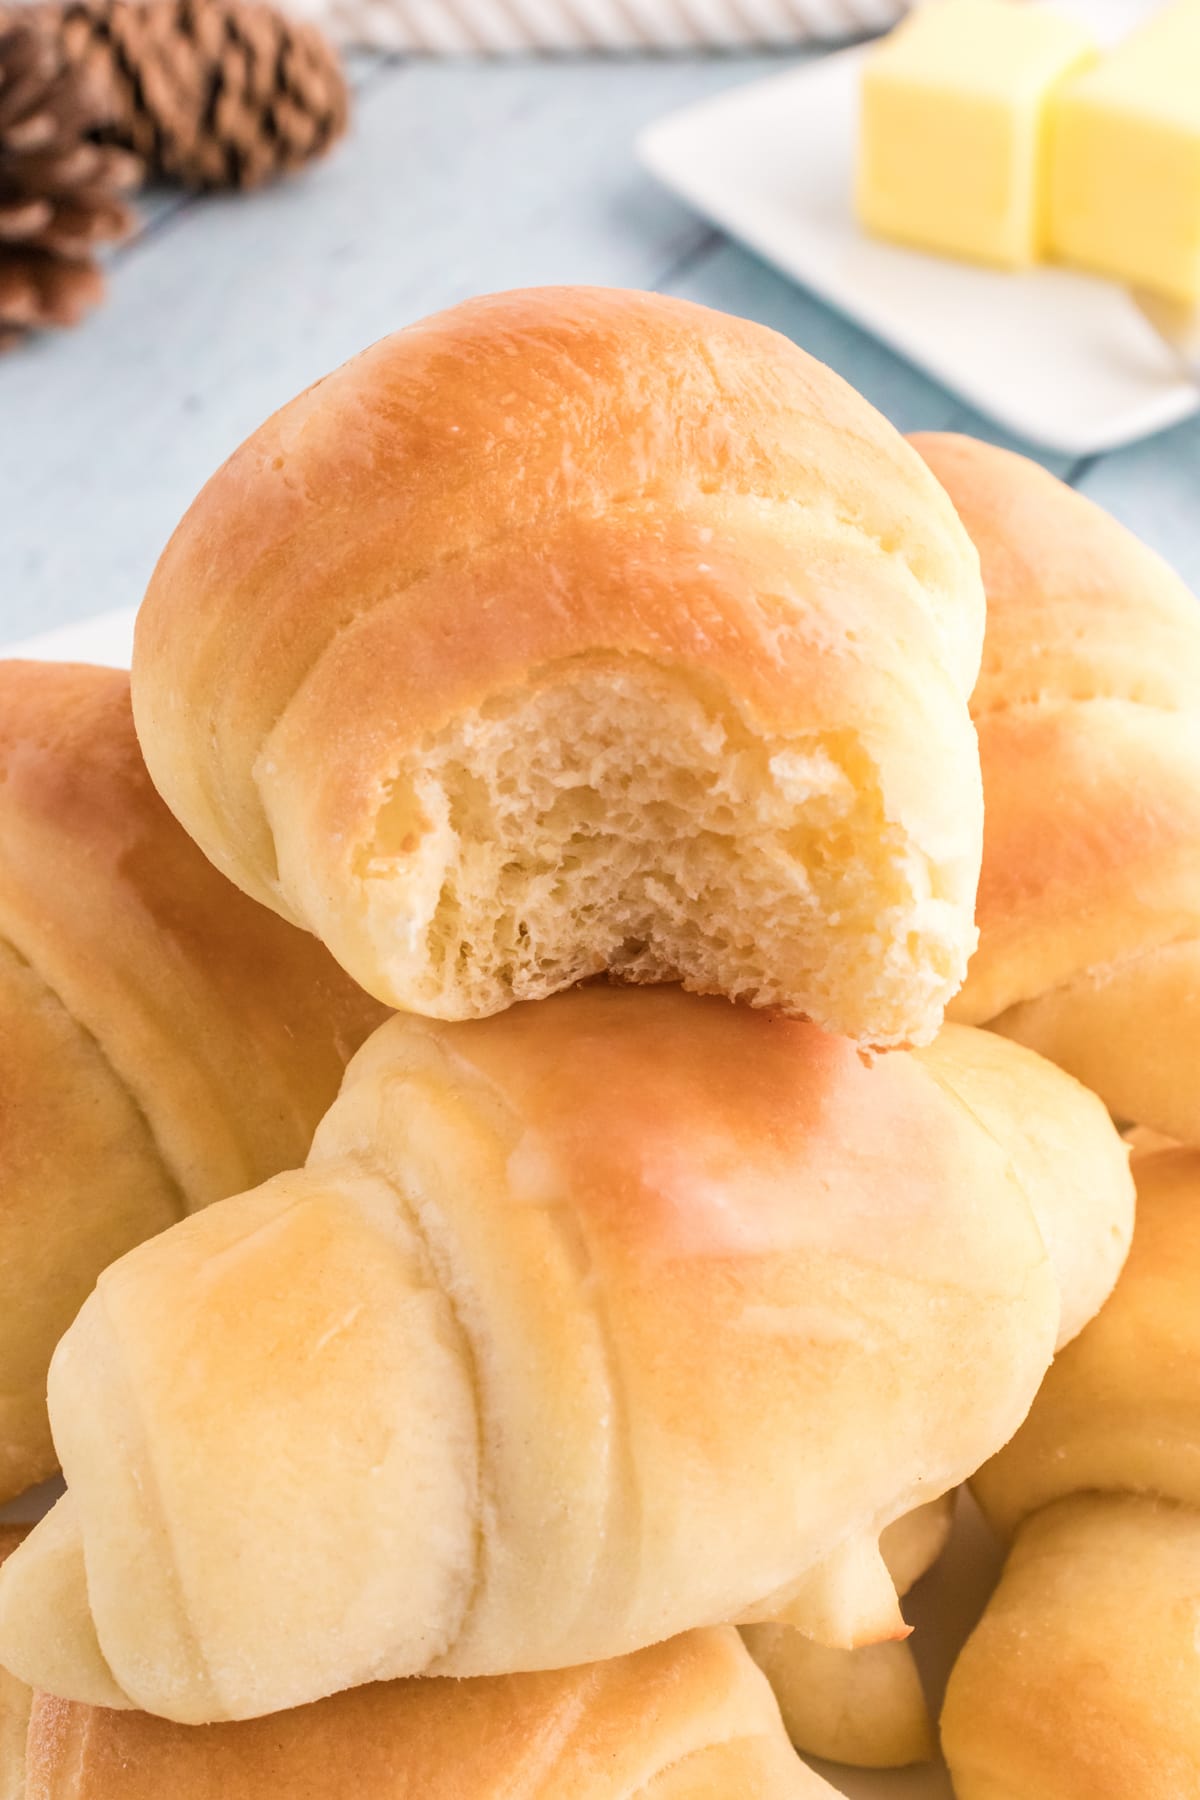 A pile of crescent rolls, the top one with a bite missing